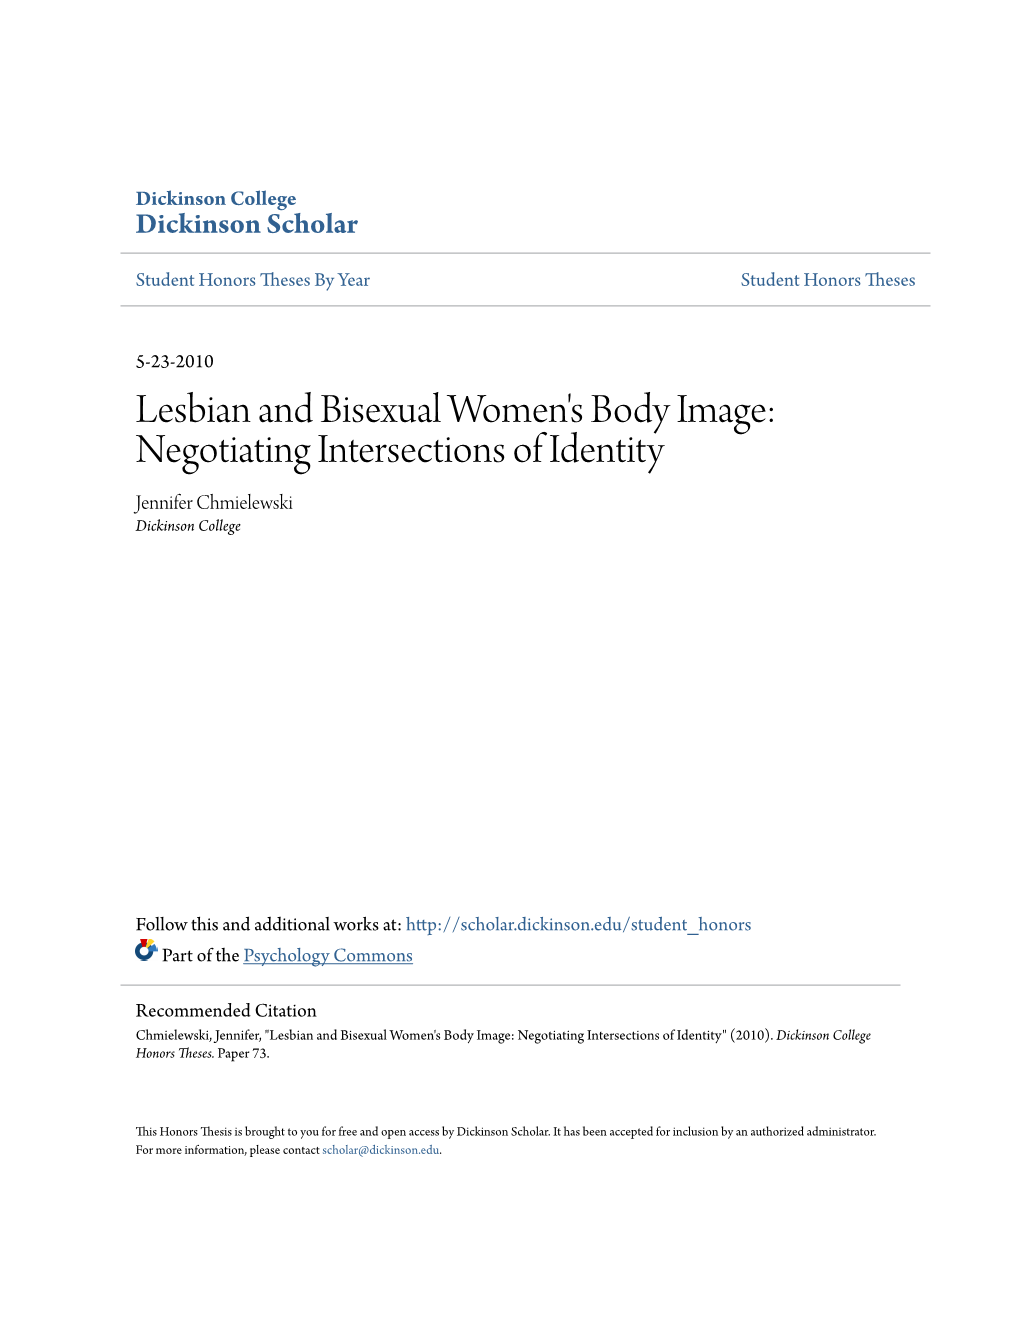 Lesbian and Bisexual Women's Body Image: Negotiating Intersections of Identity Jennifer Chmielewski Dickinson College